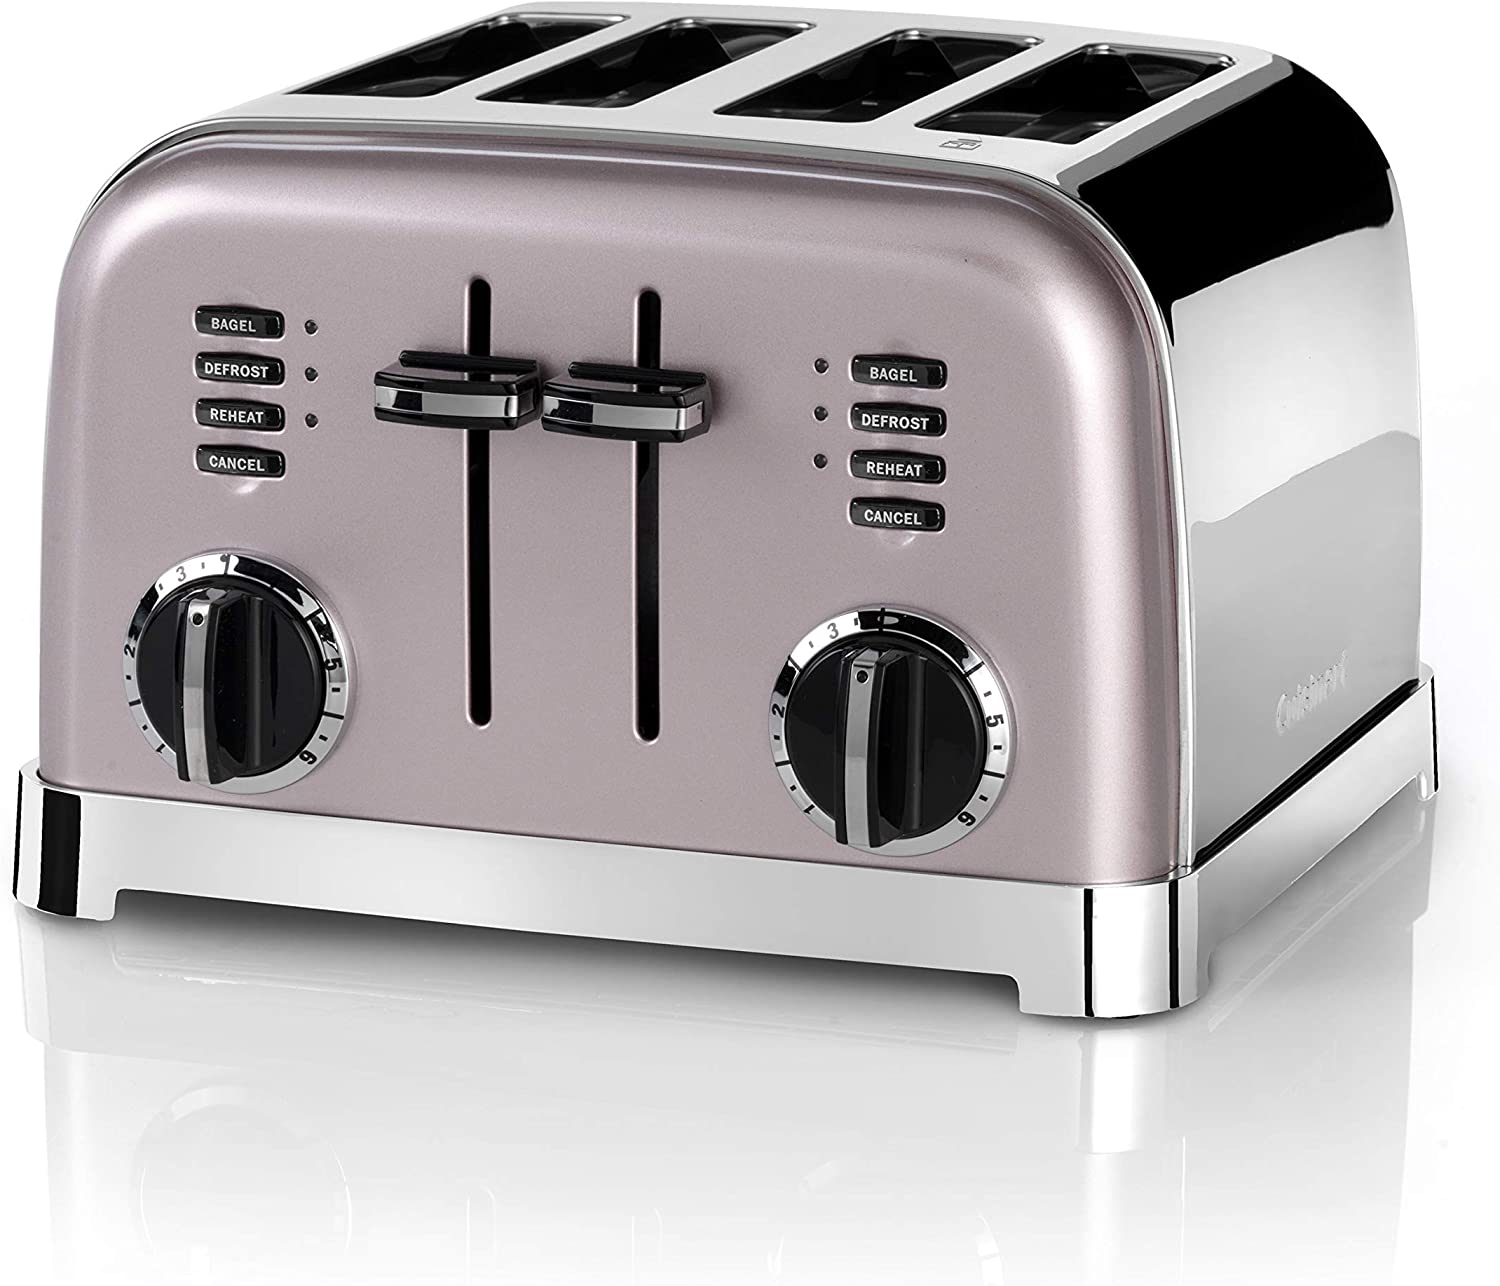 Cuisinart CPT180PIE 4-Slot Toaster with 6 Browning Levels and Defrosting, Warm-up and Stop Function, Extra Wide Toast Slots, Retro Design, Pink